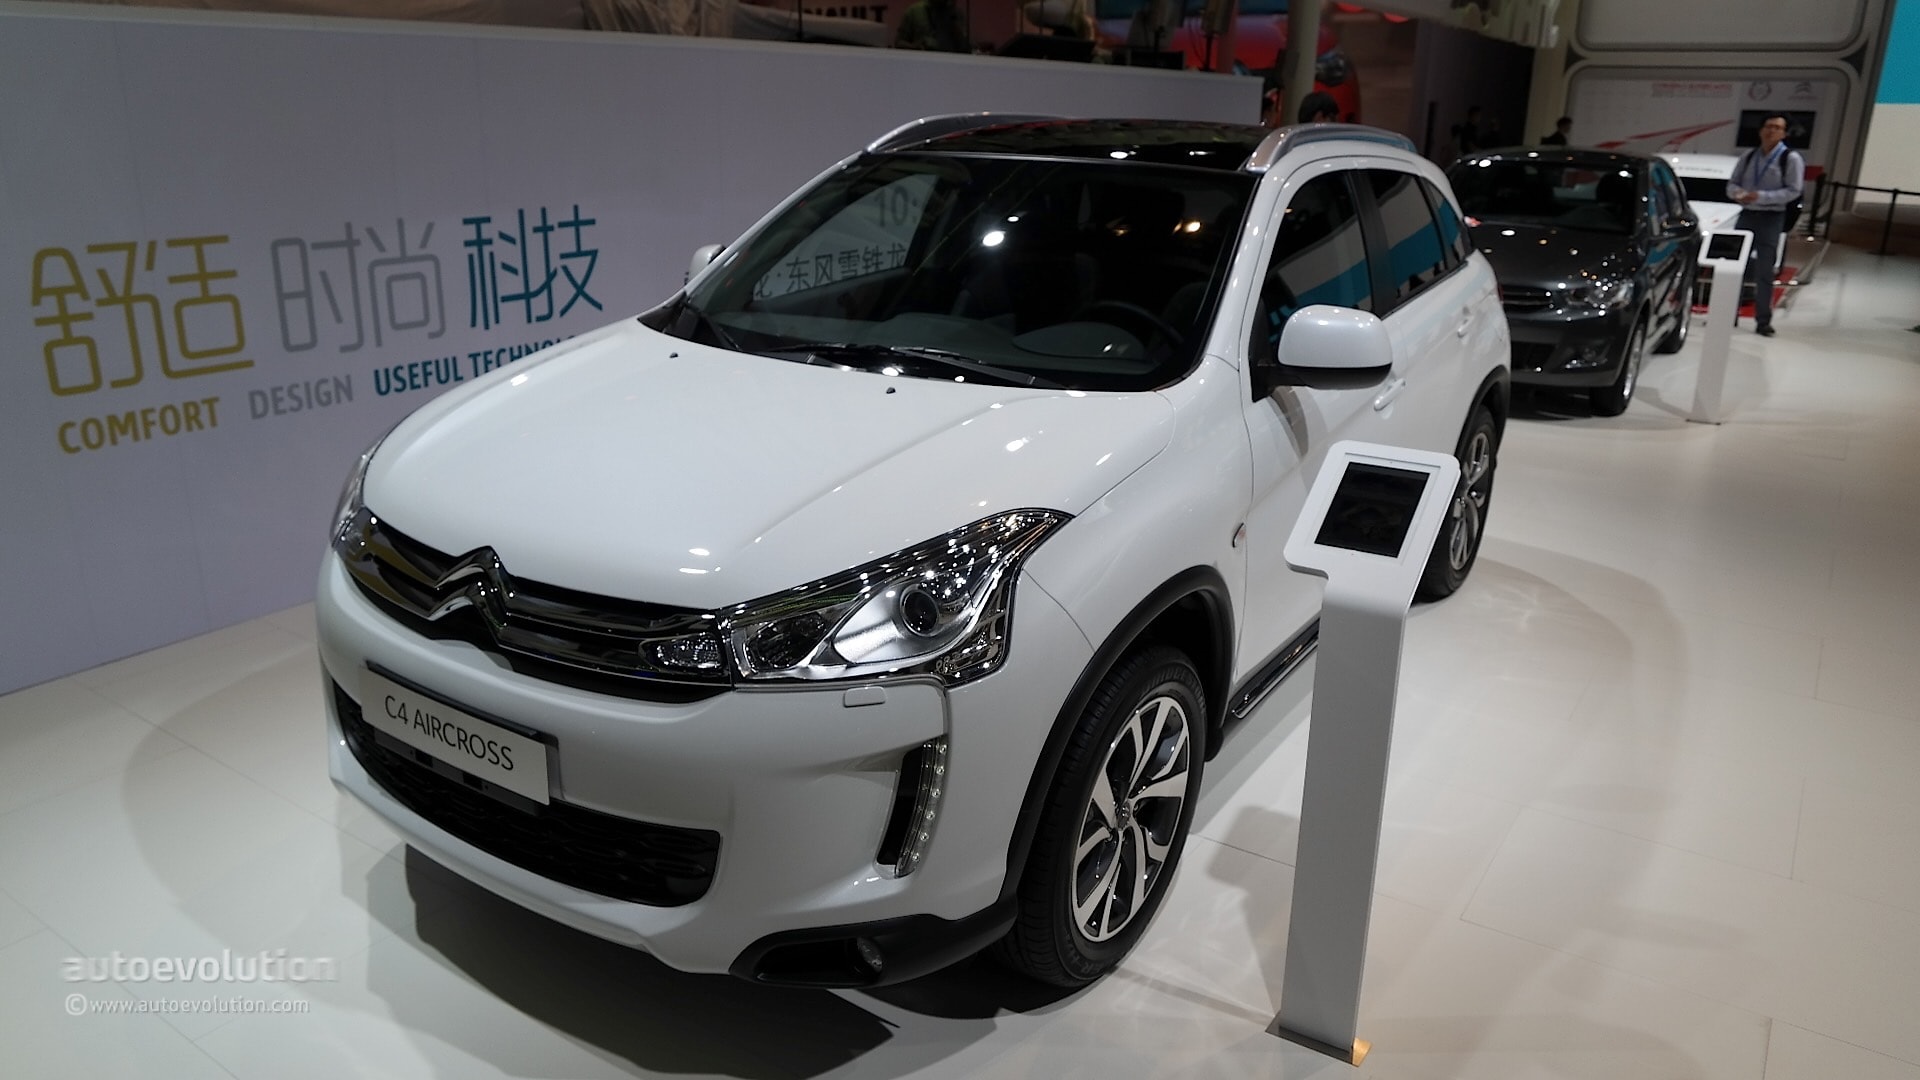 Citroen Weighs In the Old and New With the C4 Aircross at Auto Shanghai  2015 - autoevolution